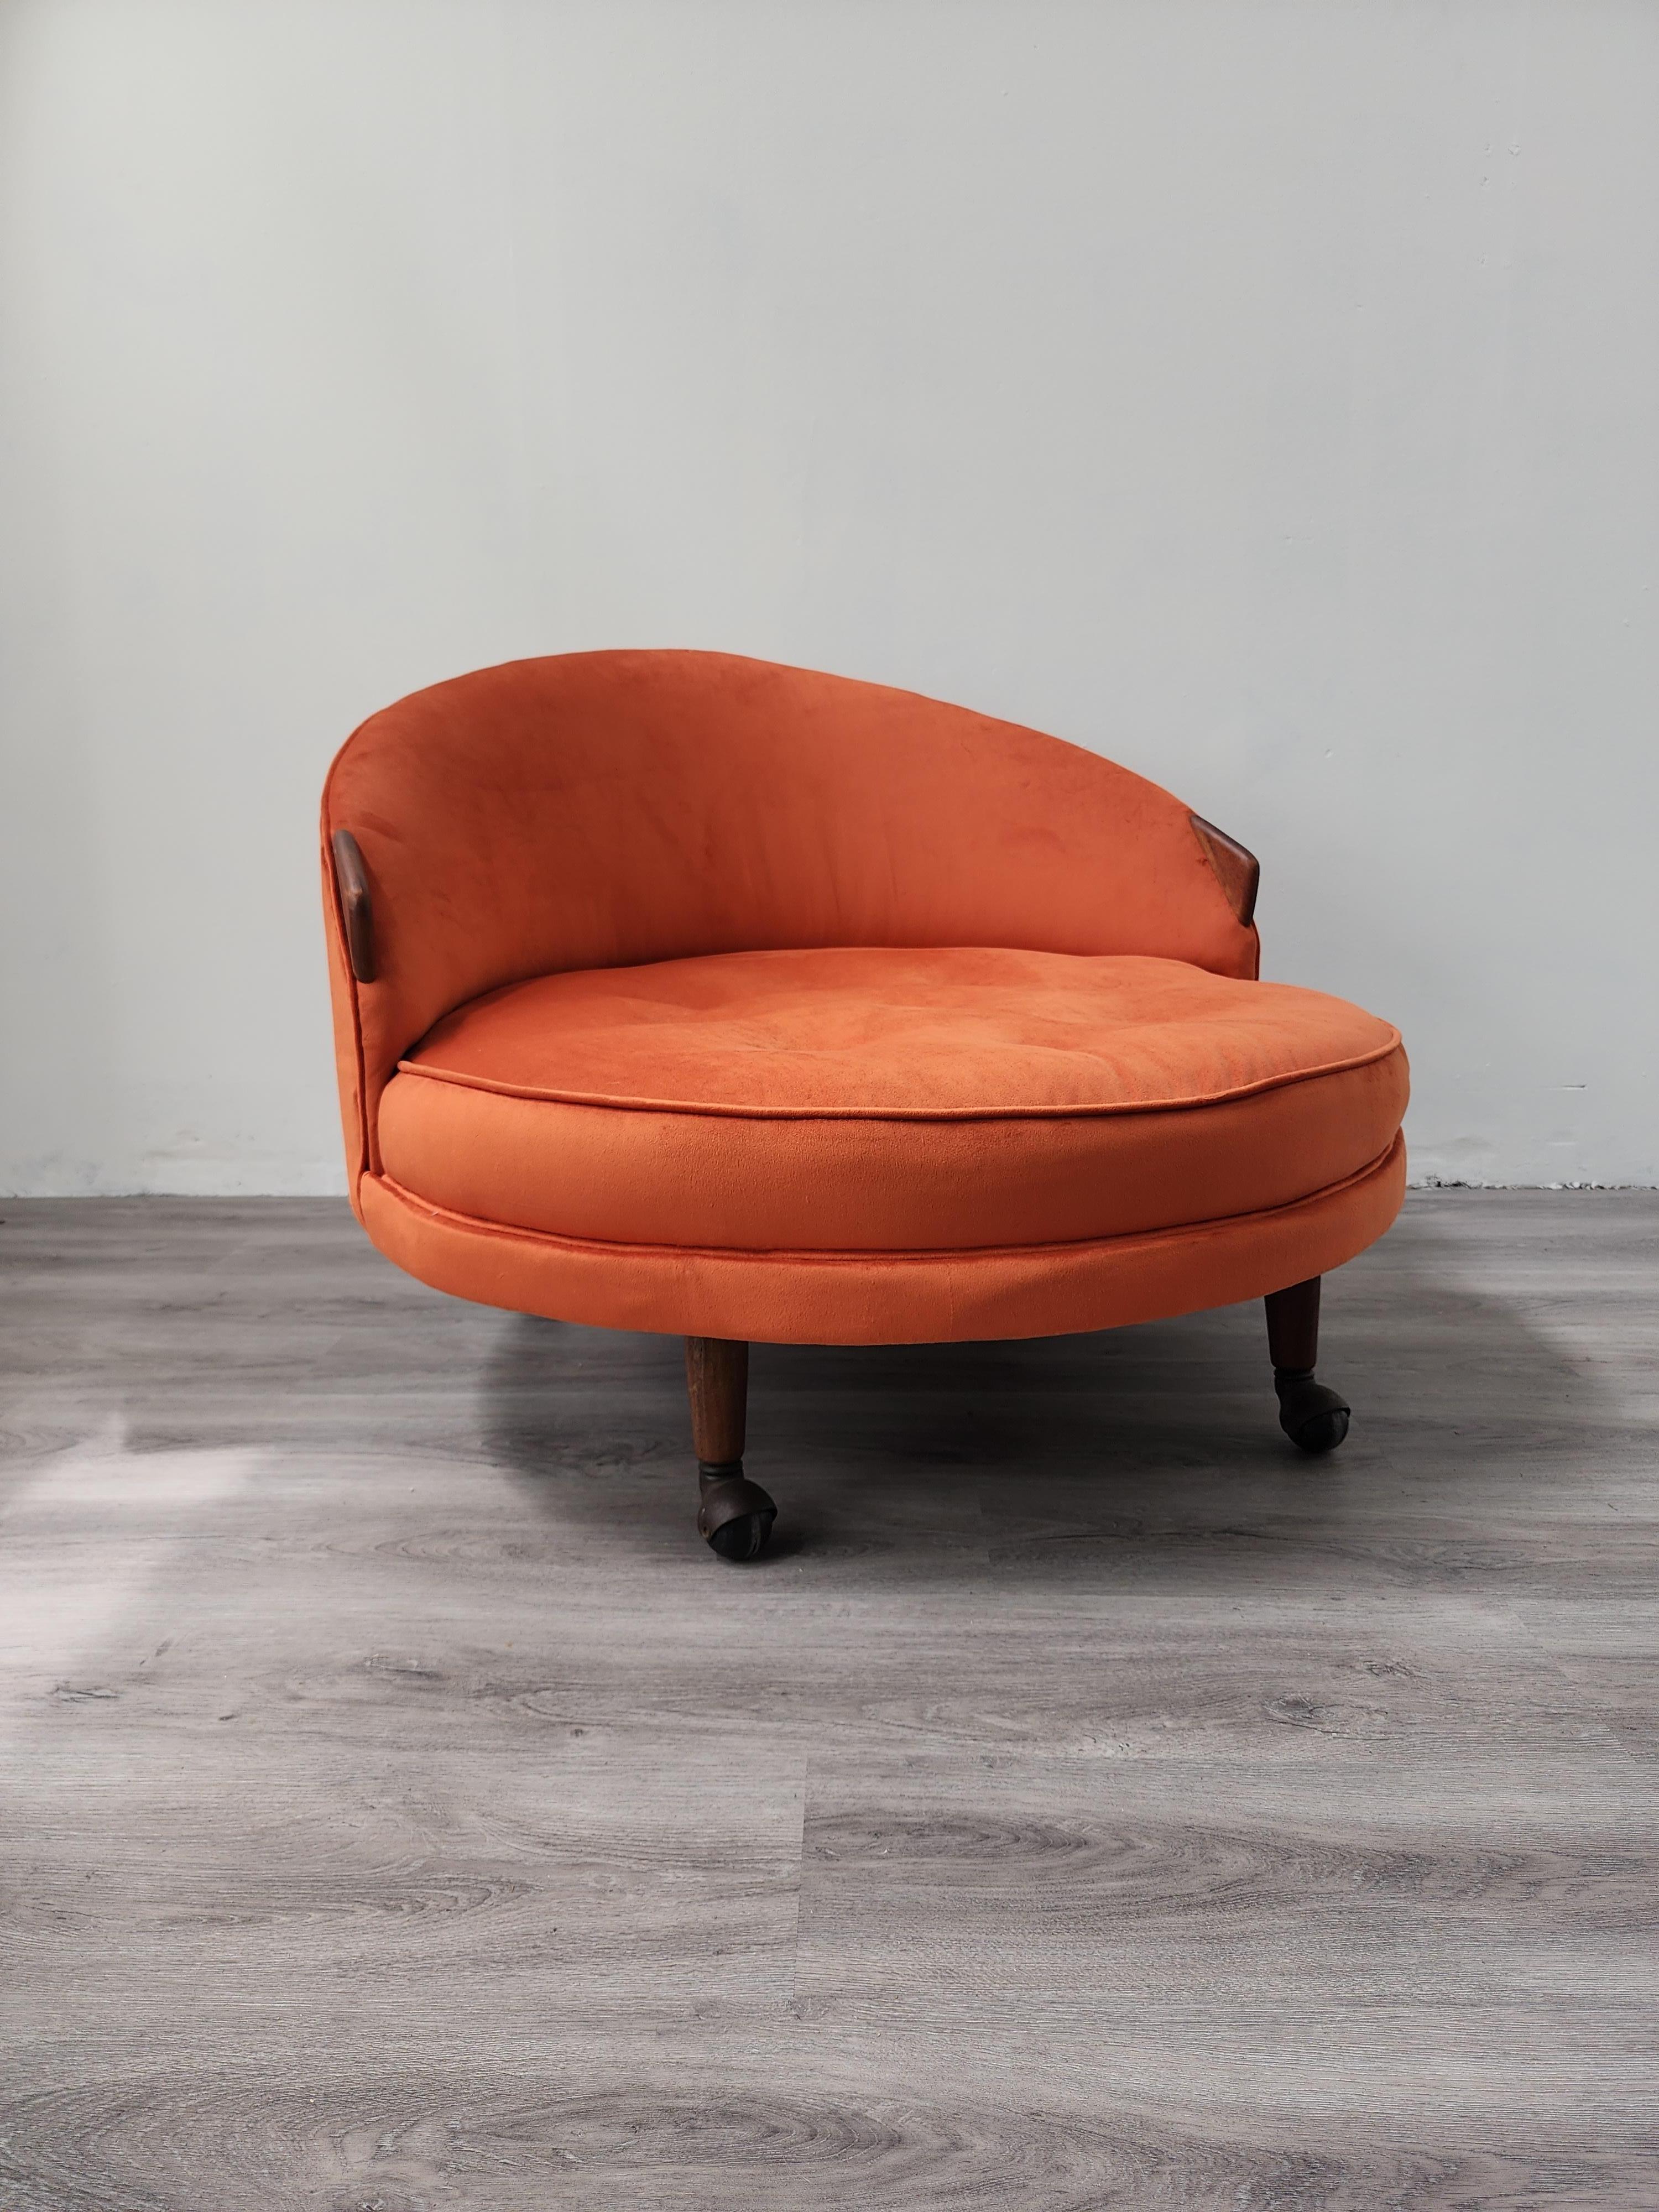 This chair is one of the most iconic designs of the mid-29th century. The Havana Chair designed by Adrian Pearsall is a statement piece with its vibrant color and large round base on wheels. The newly reupholstered chair is in the perfect orange